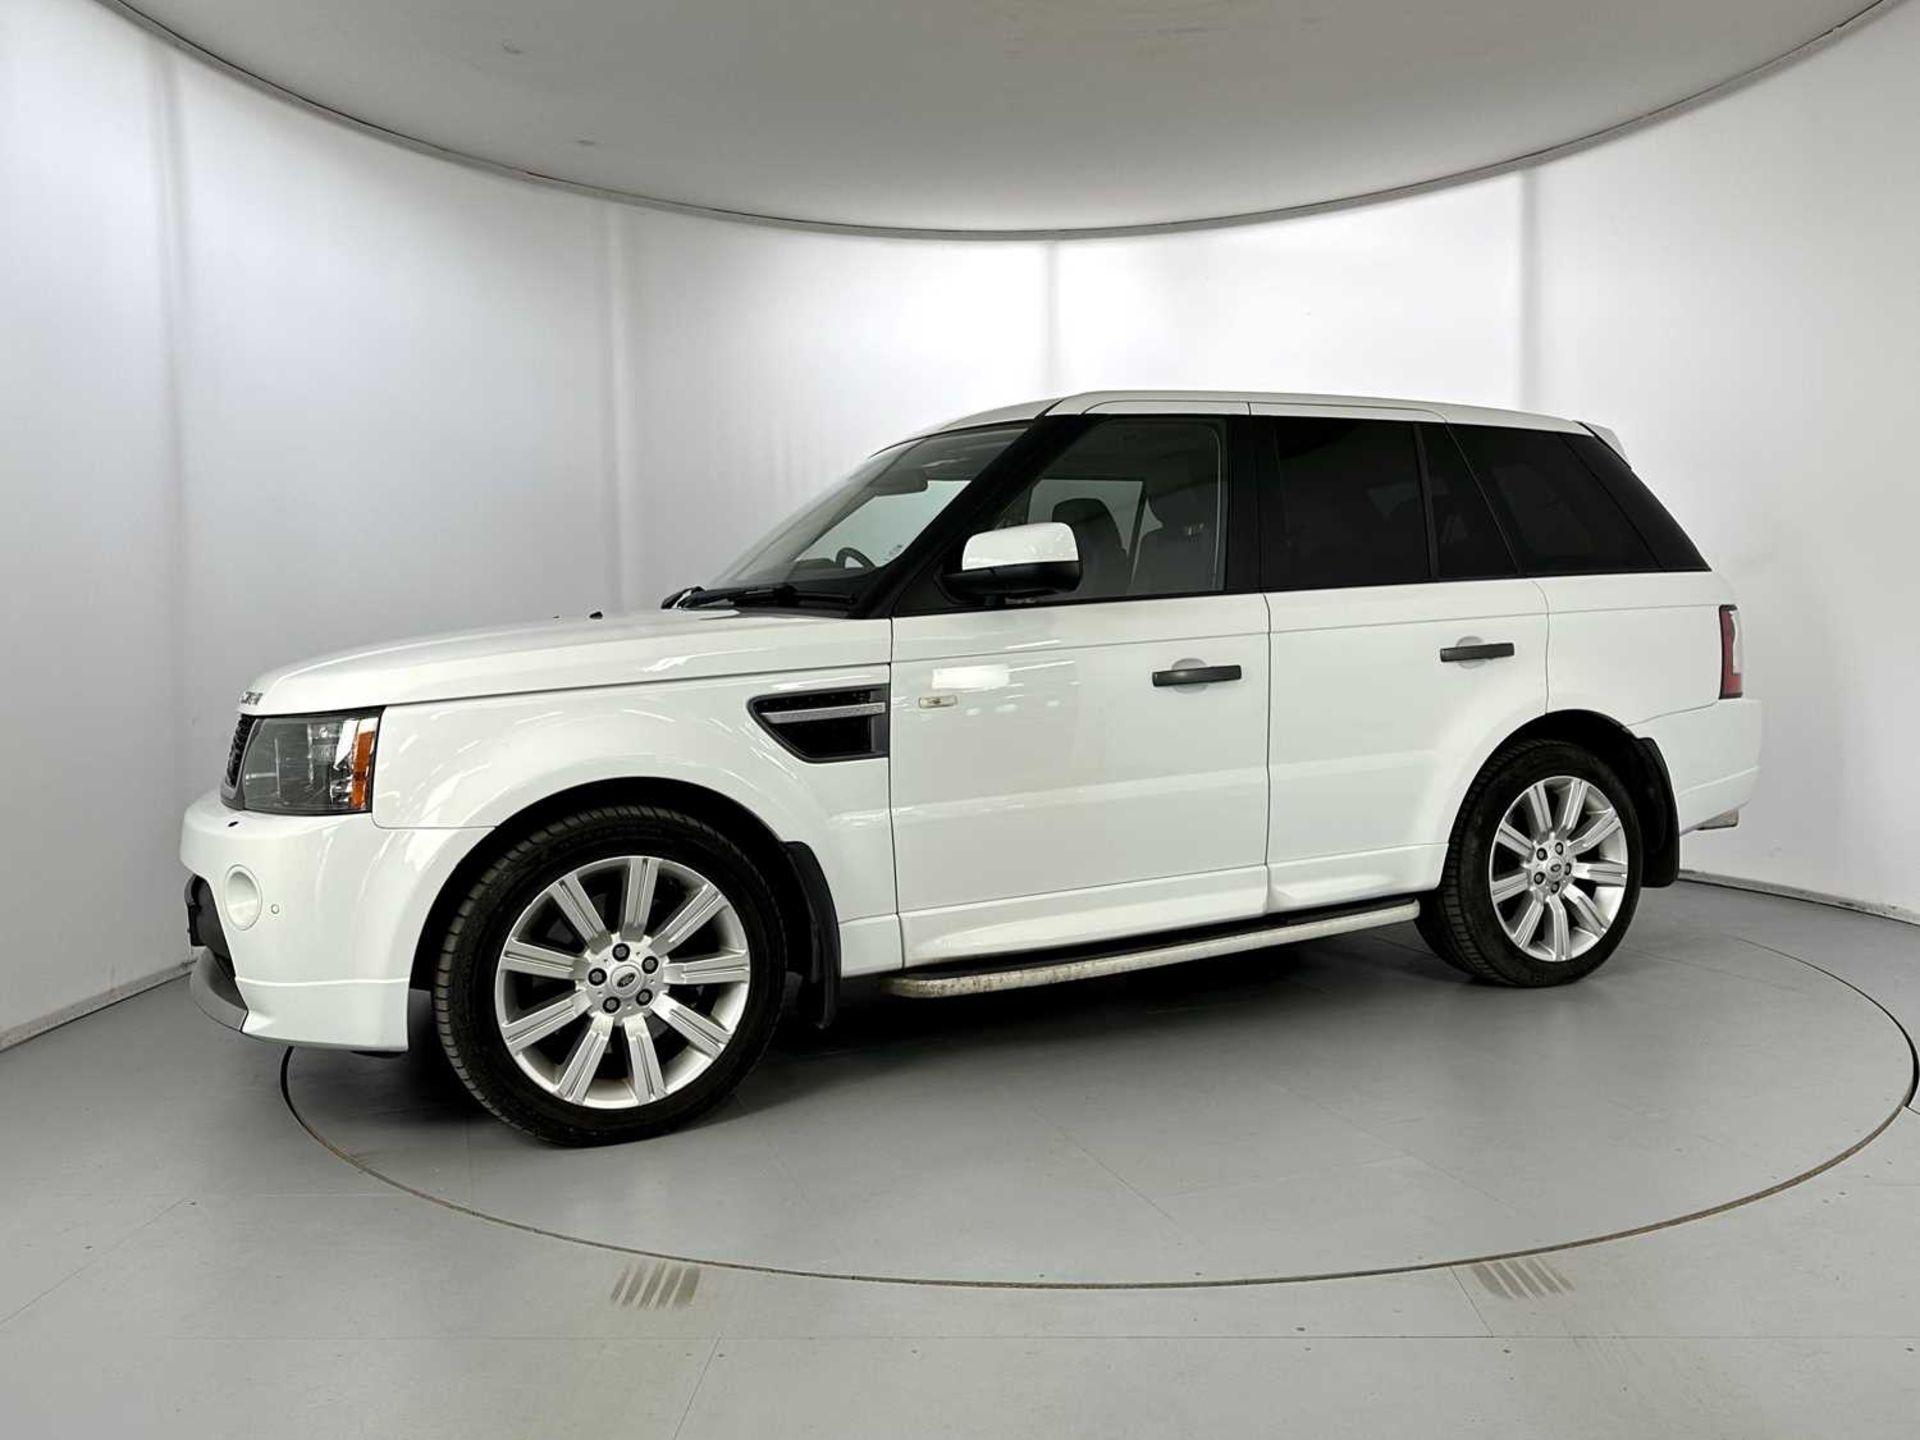 2011 Land Rover Range Rover Sport Stormer Edition  - Image 4 of 33